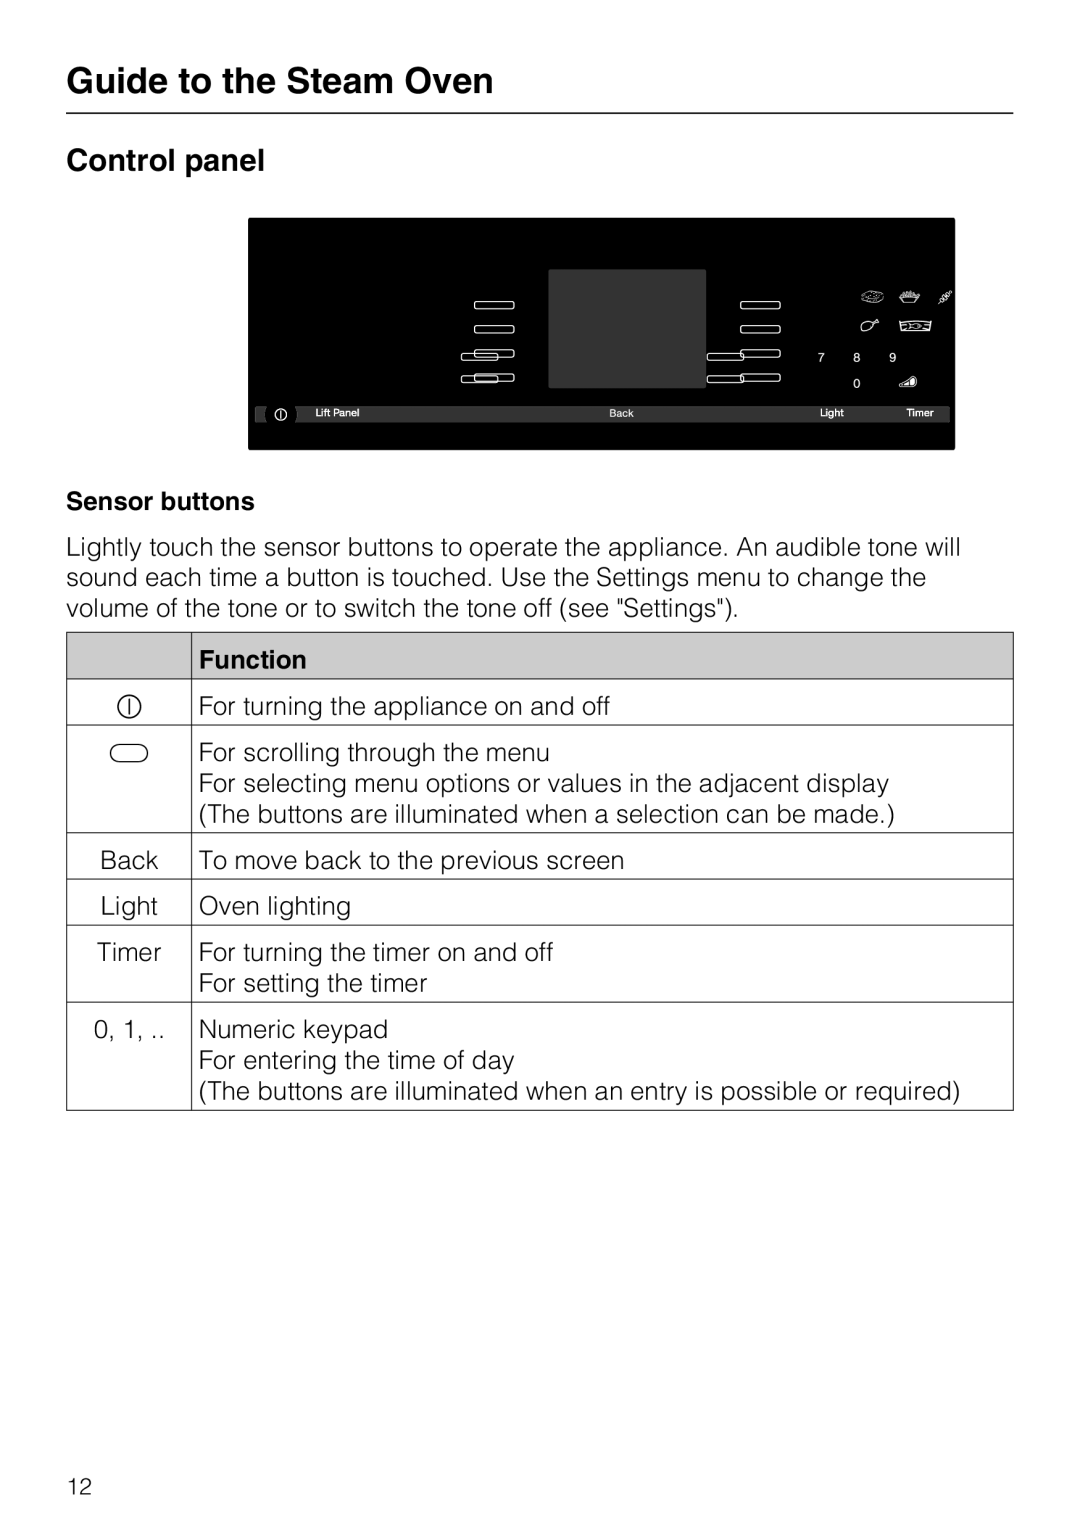 Miele 09 800 830 installation instructions Control panel, Guide to the Steam Oven, Sensor buttons, Function 